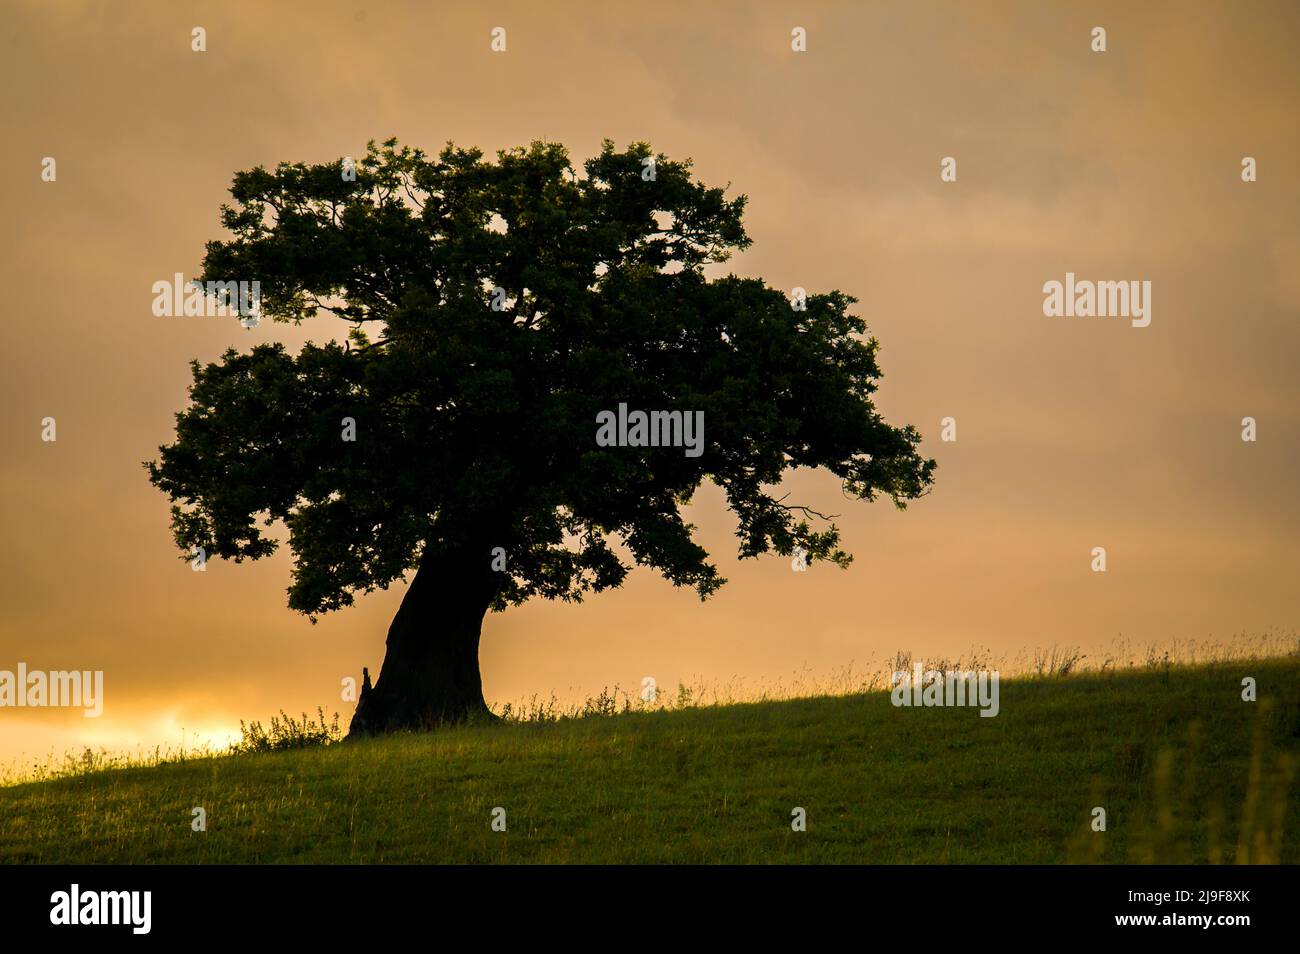 A large lonely tree at sunset Stock Photo